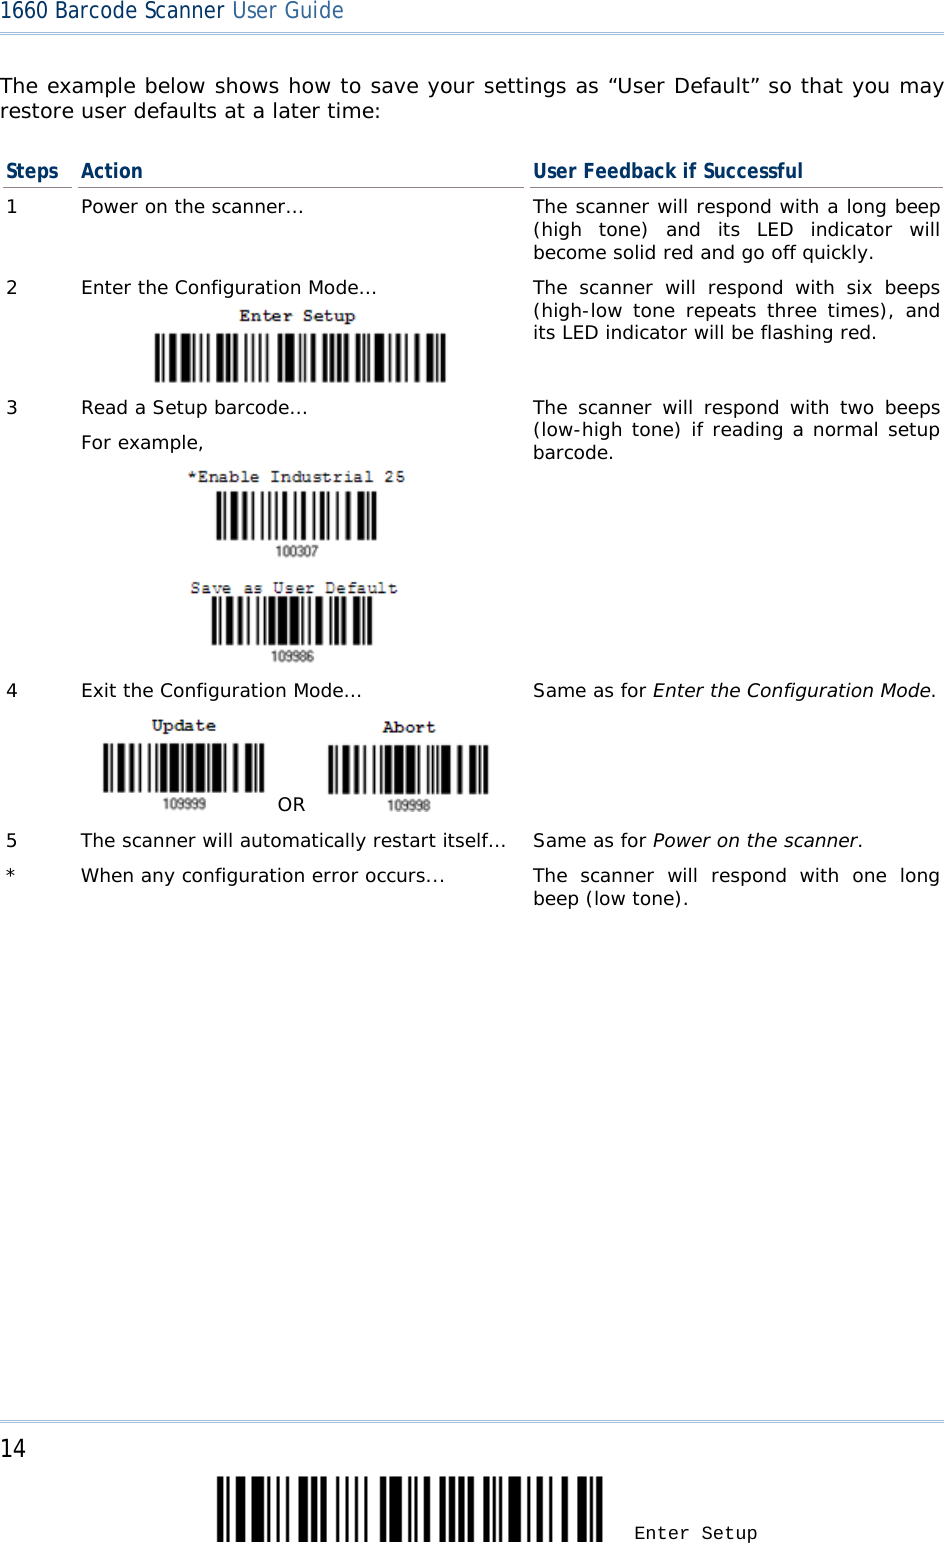 14 Enter Setup 1660 Barcode Scanner User Guide  The example below shows how to save your settings as “User Default” so that you may restore user defaults at a later time: Steps Action User Feedback if Successful 1  Power on the scanner… The scanner will respond with a long beep (high tone) and its LED indicator will become solid red and go off quickly. 2  Enter the Configuration Mode…  The scanner will respond with six beeps (high-low tone repeats three times), and its LED indicator will be flashing red.  3  Read a Setup barcode… For example,               The scanner will respond with two beeps (low-high tone) if reading a normal setup barcode. 4  Exit the Configuration Mode…     OR    Same as for Enter the Configuration Mode. 5  The scanner will automatically restart itself… Same as for Power on the scanner. *  When any configuration error occurs... The scanner will respond with one long beep (low tone).  